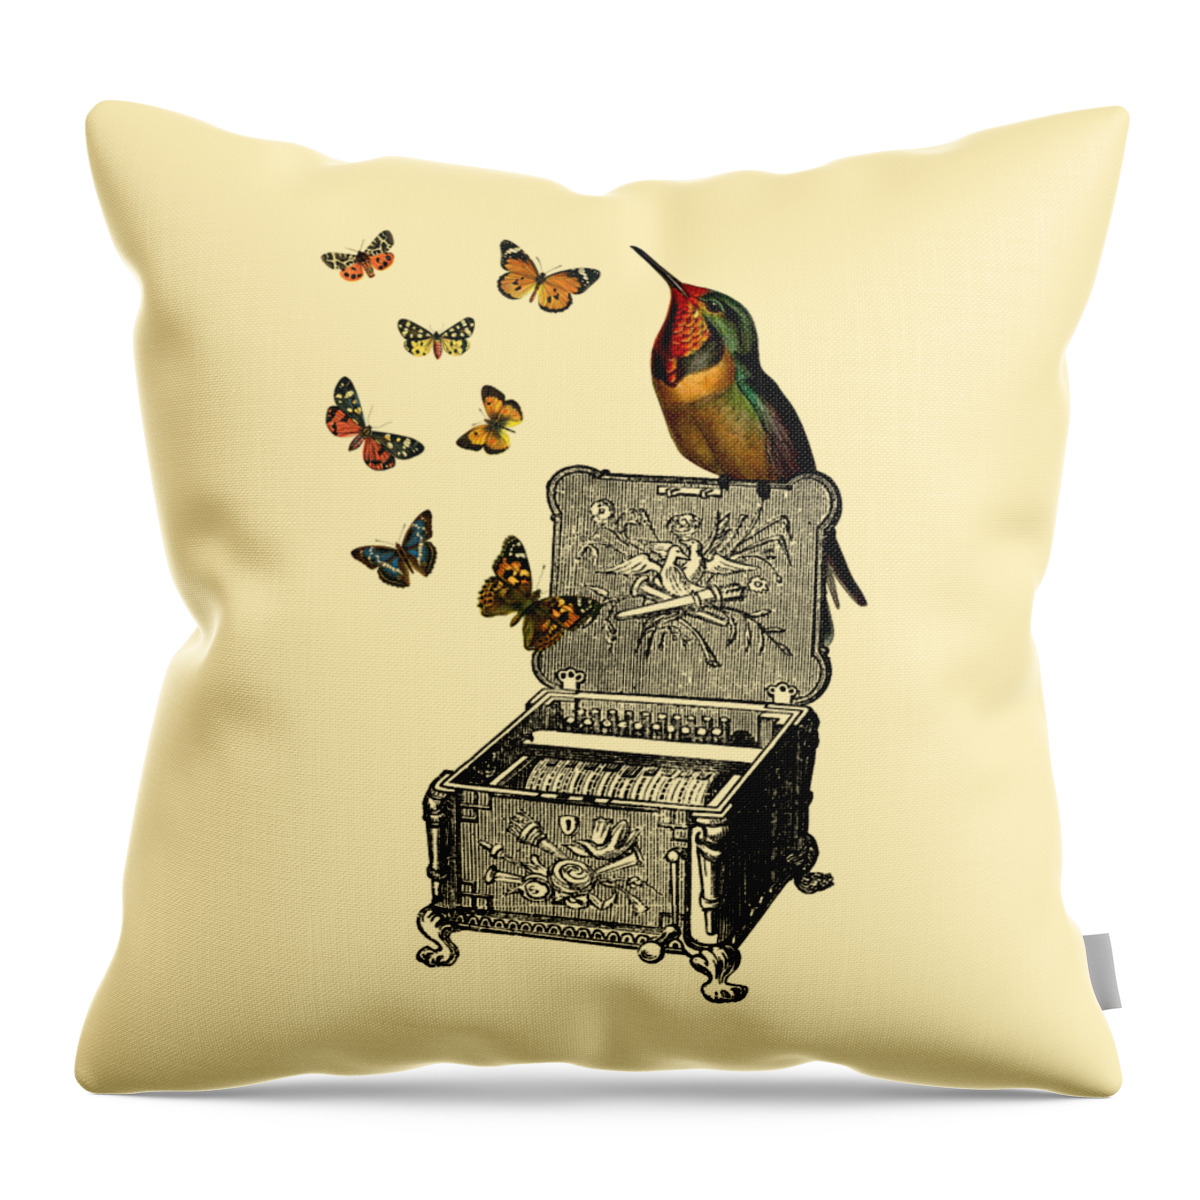 Bird Throw Pillow featuring the digital art Whimsy Melody by Madame Memento